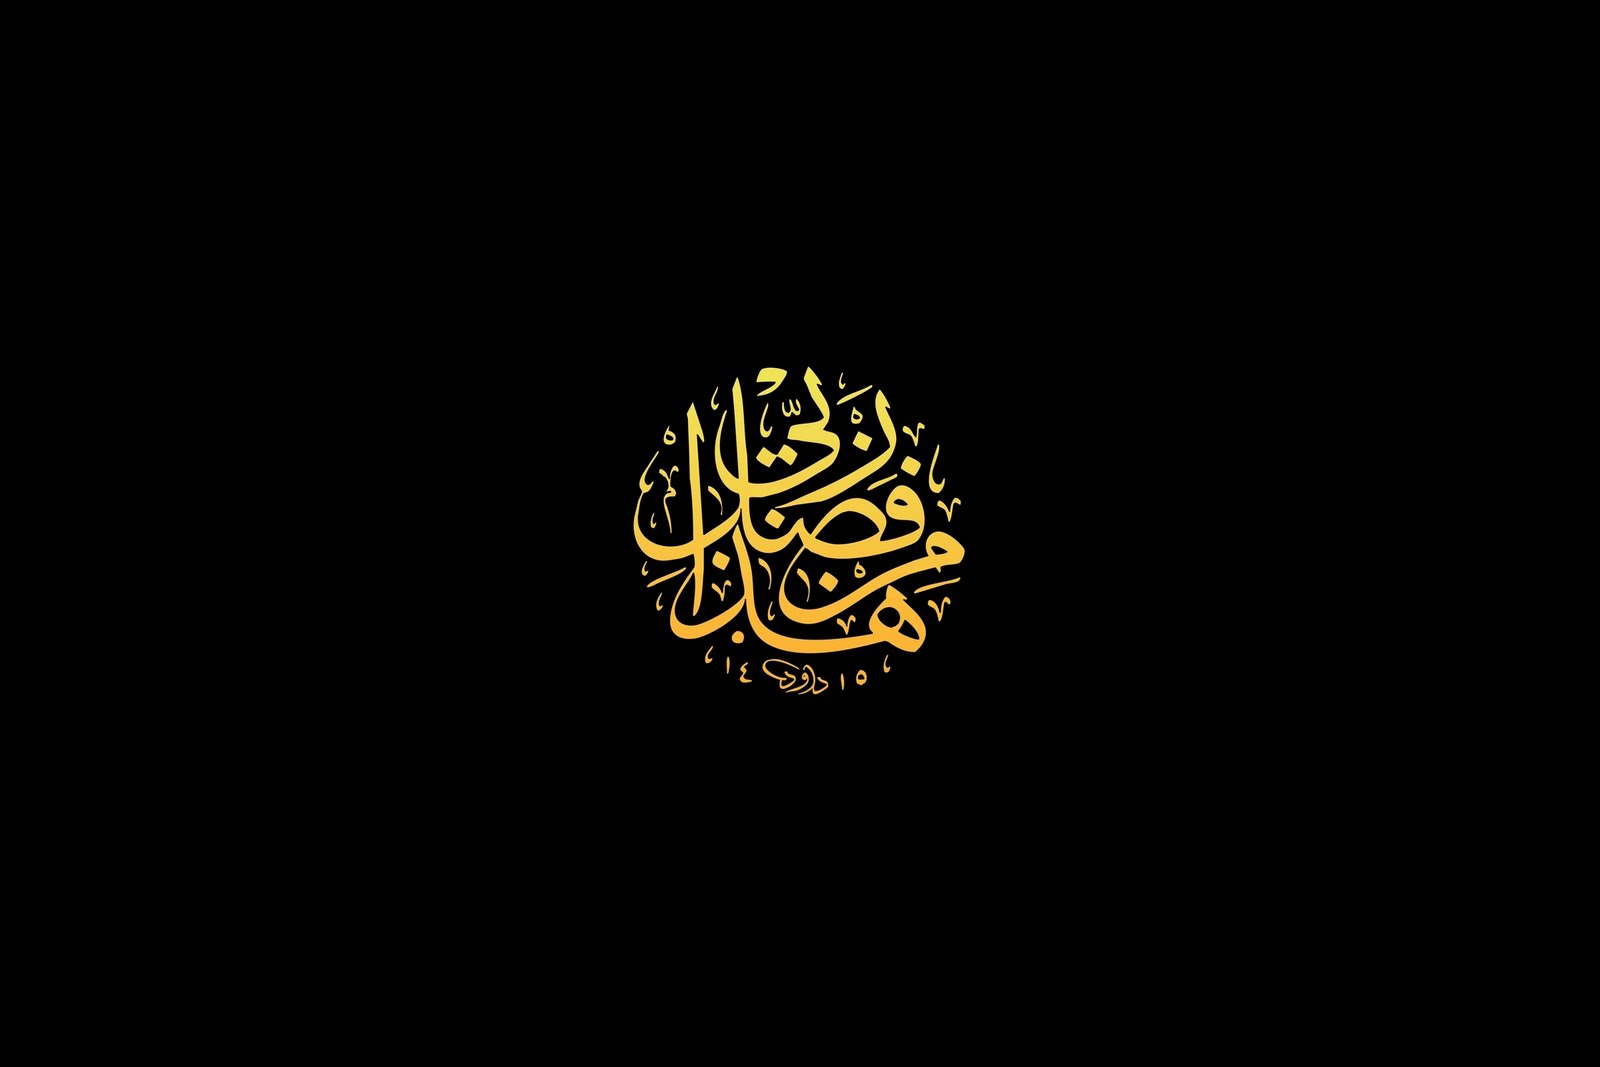  PERFECT RELIGION Best Islamic Calligraphy Wallpapers Free Downloads